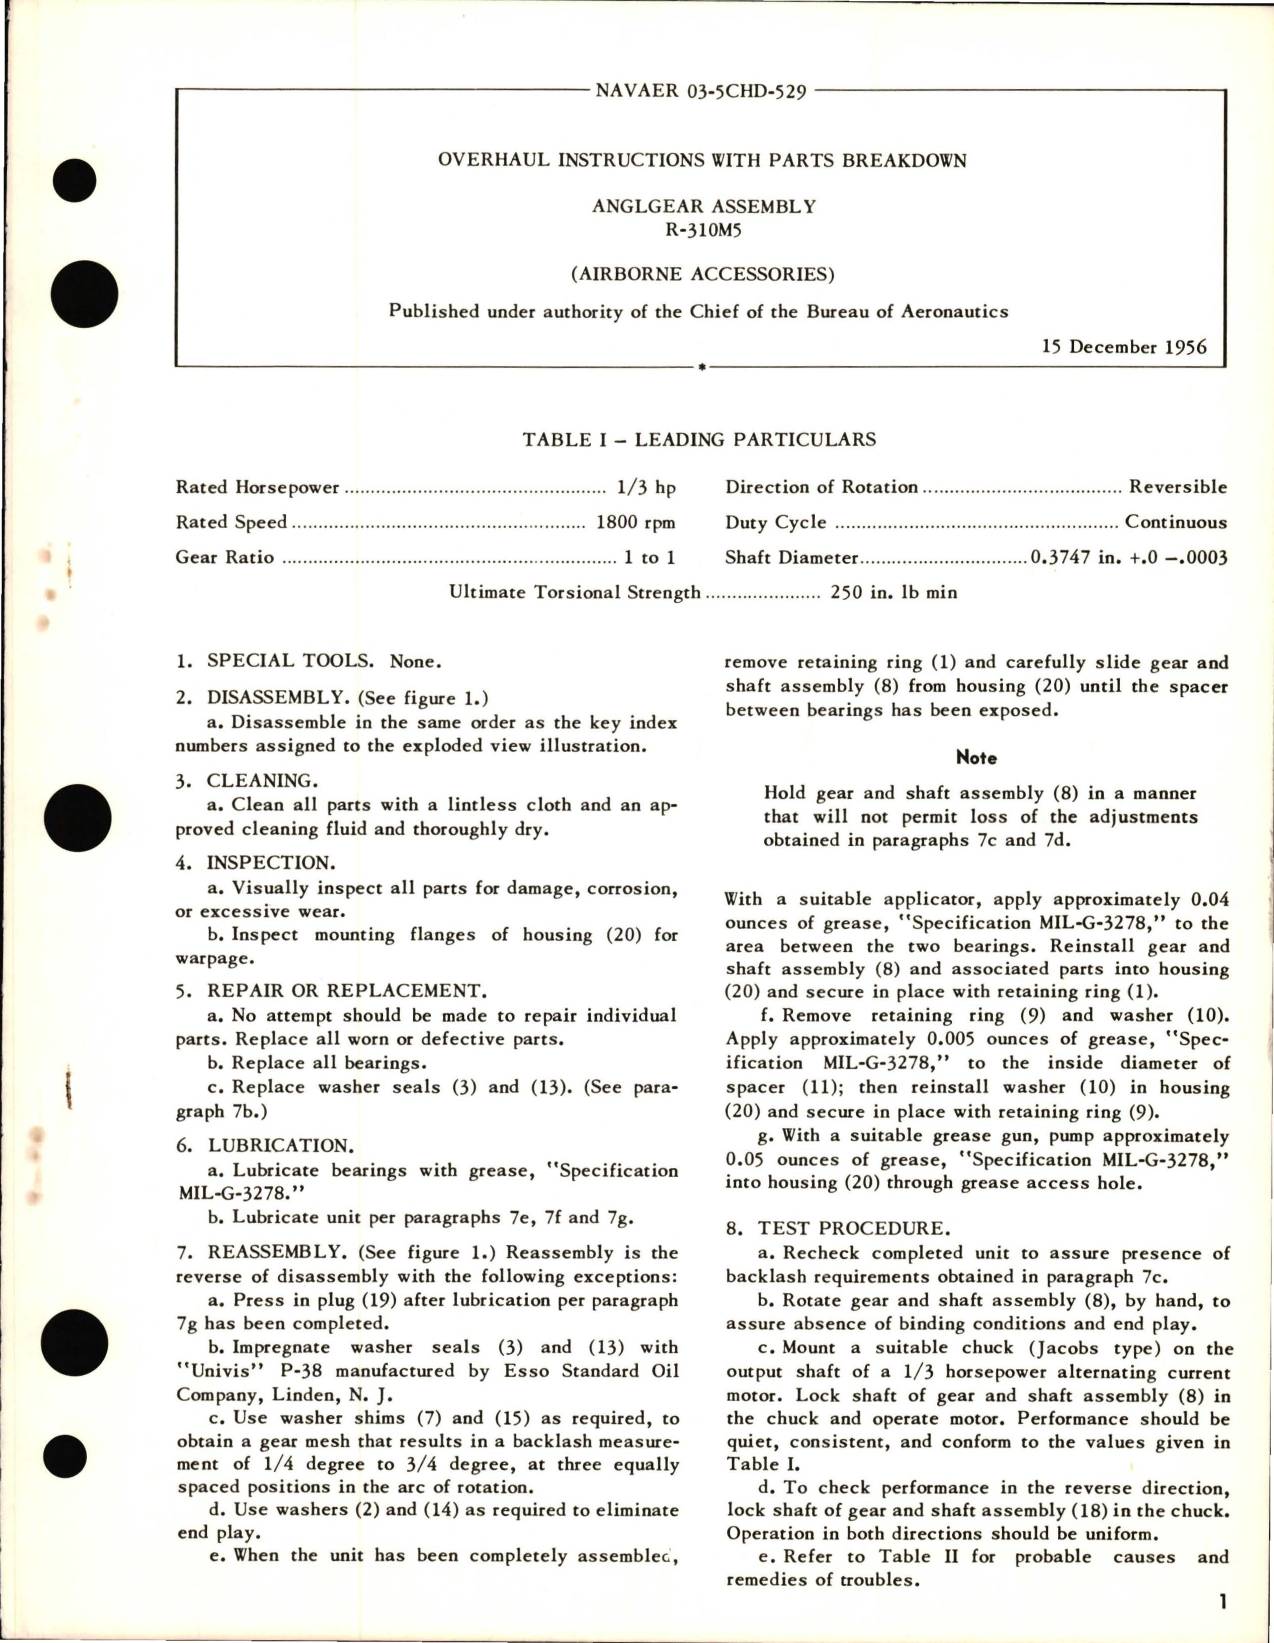 Sample page 1 from AirCorps Library document: Overhaul Instructions with Parts Breakdown for Anglgear Assembly R-310M5